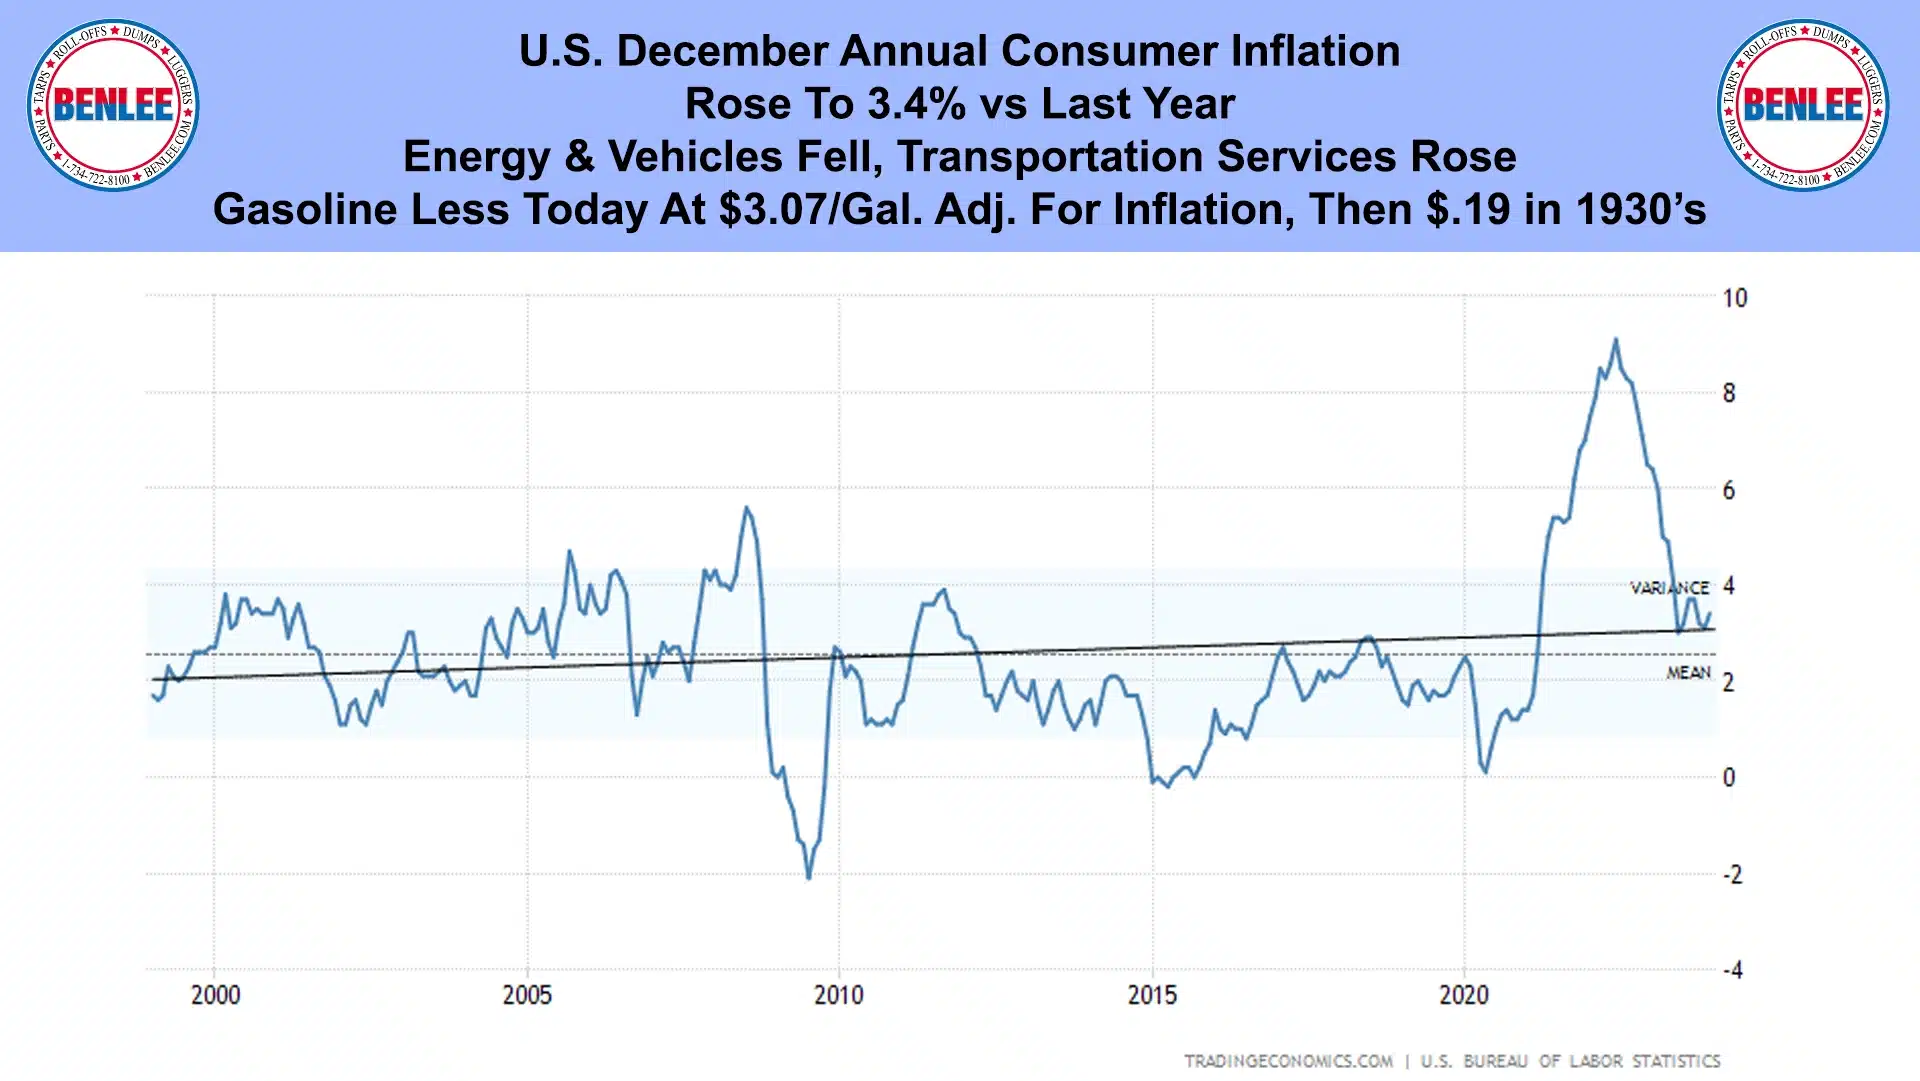 U.S. December Annual Consumer Inflation